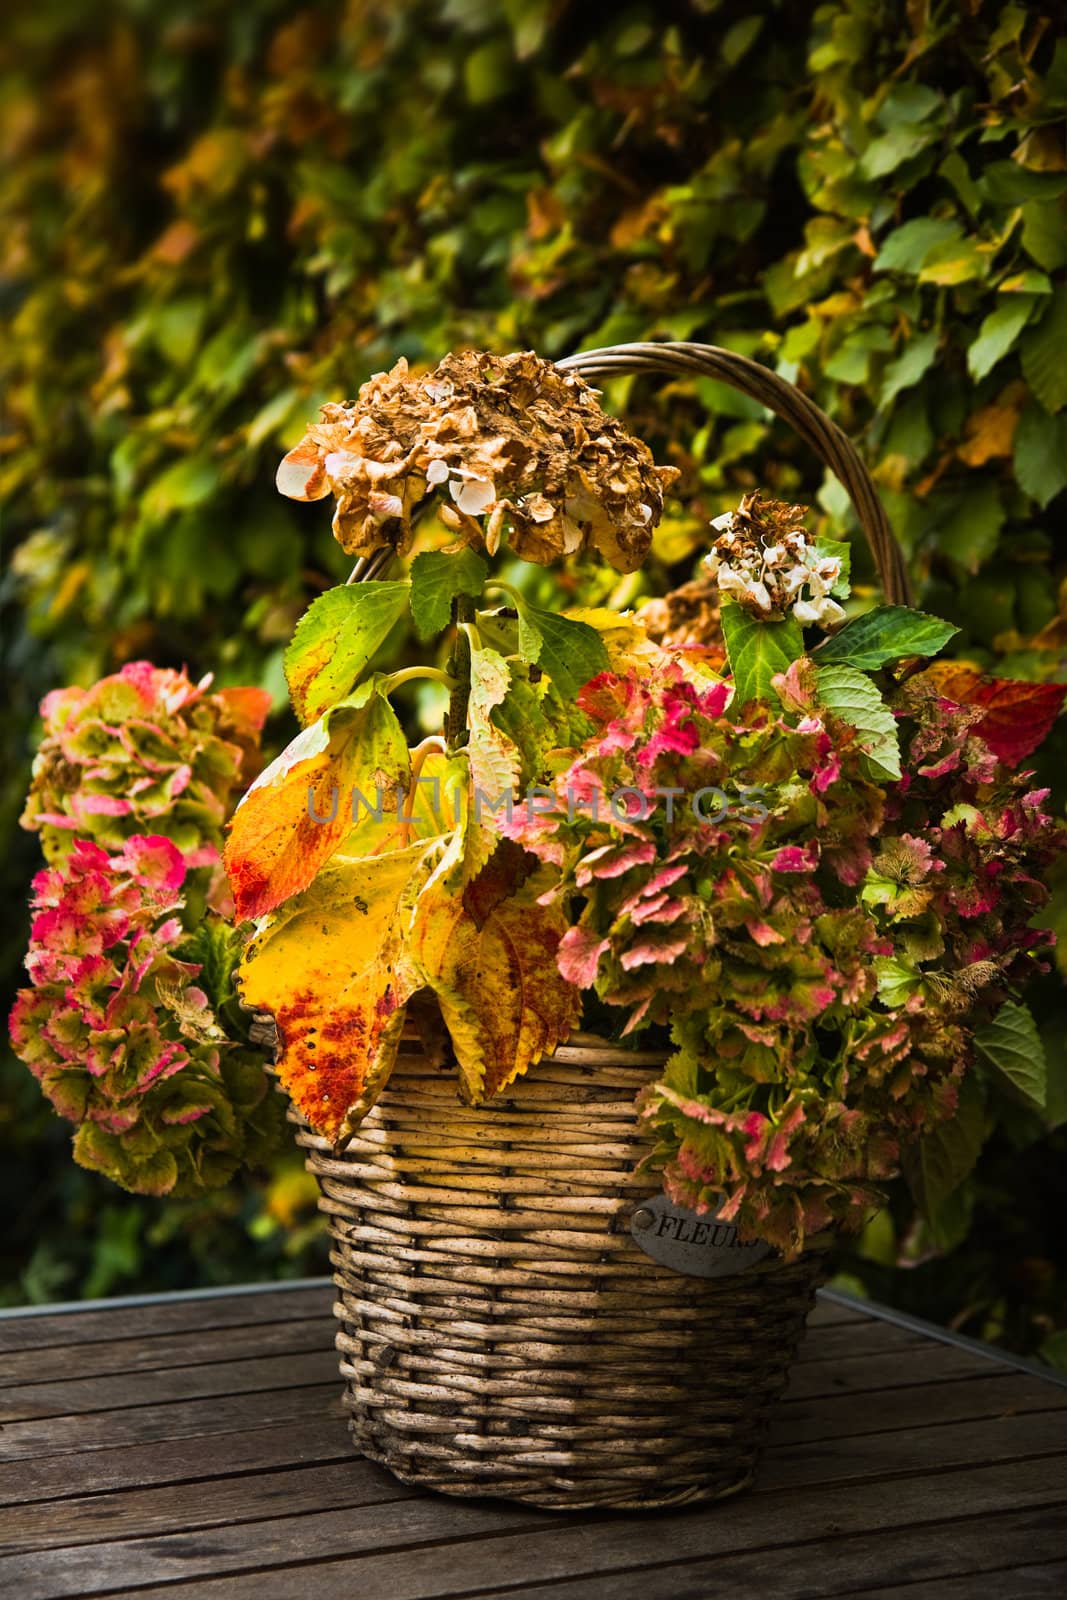 Autumn garden - basket with colorful Hortensia or Hydrangea on a table